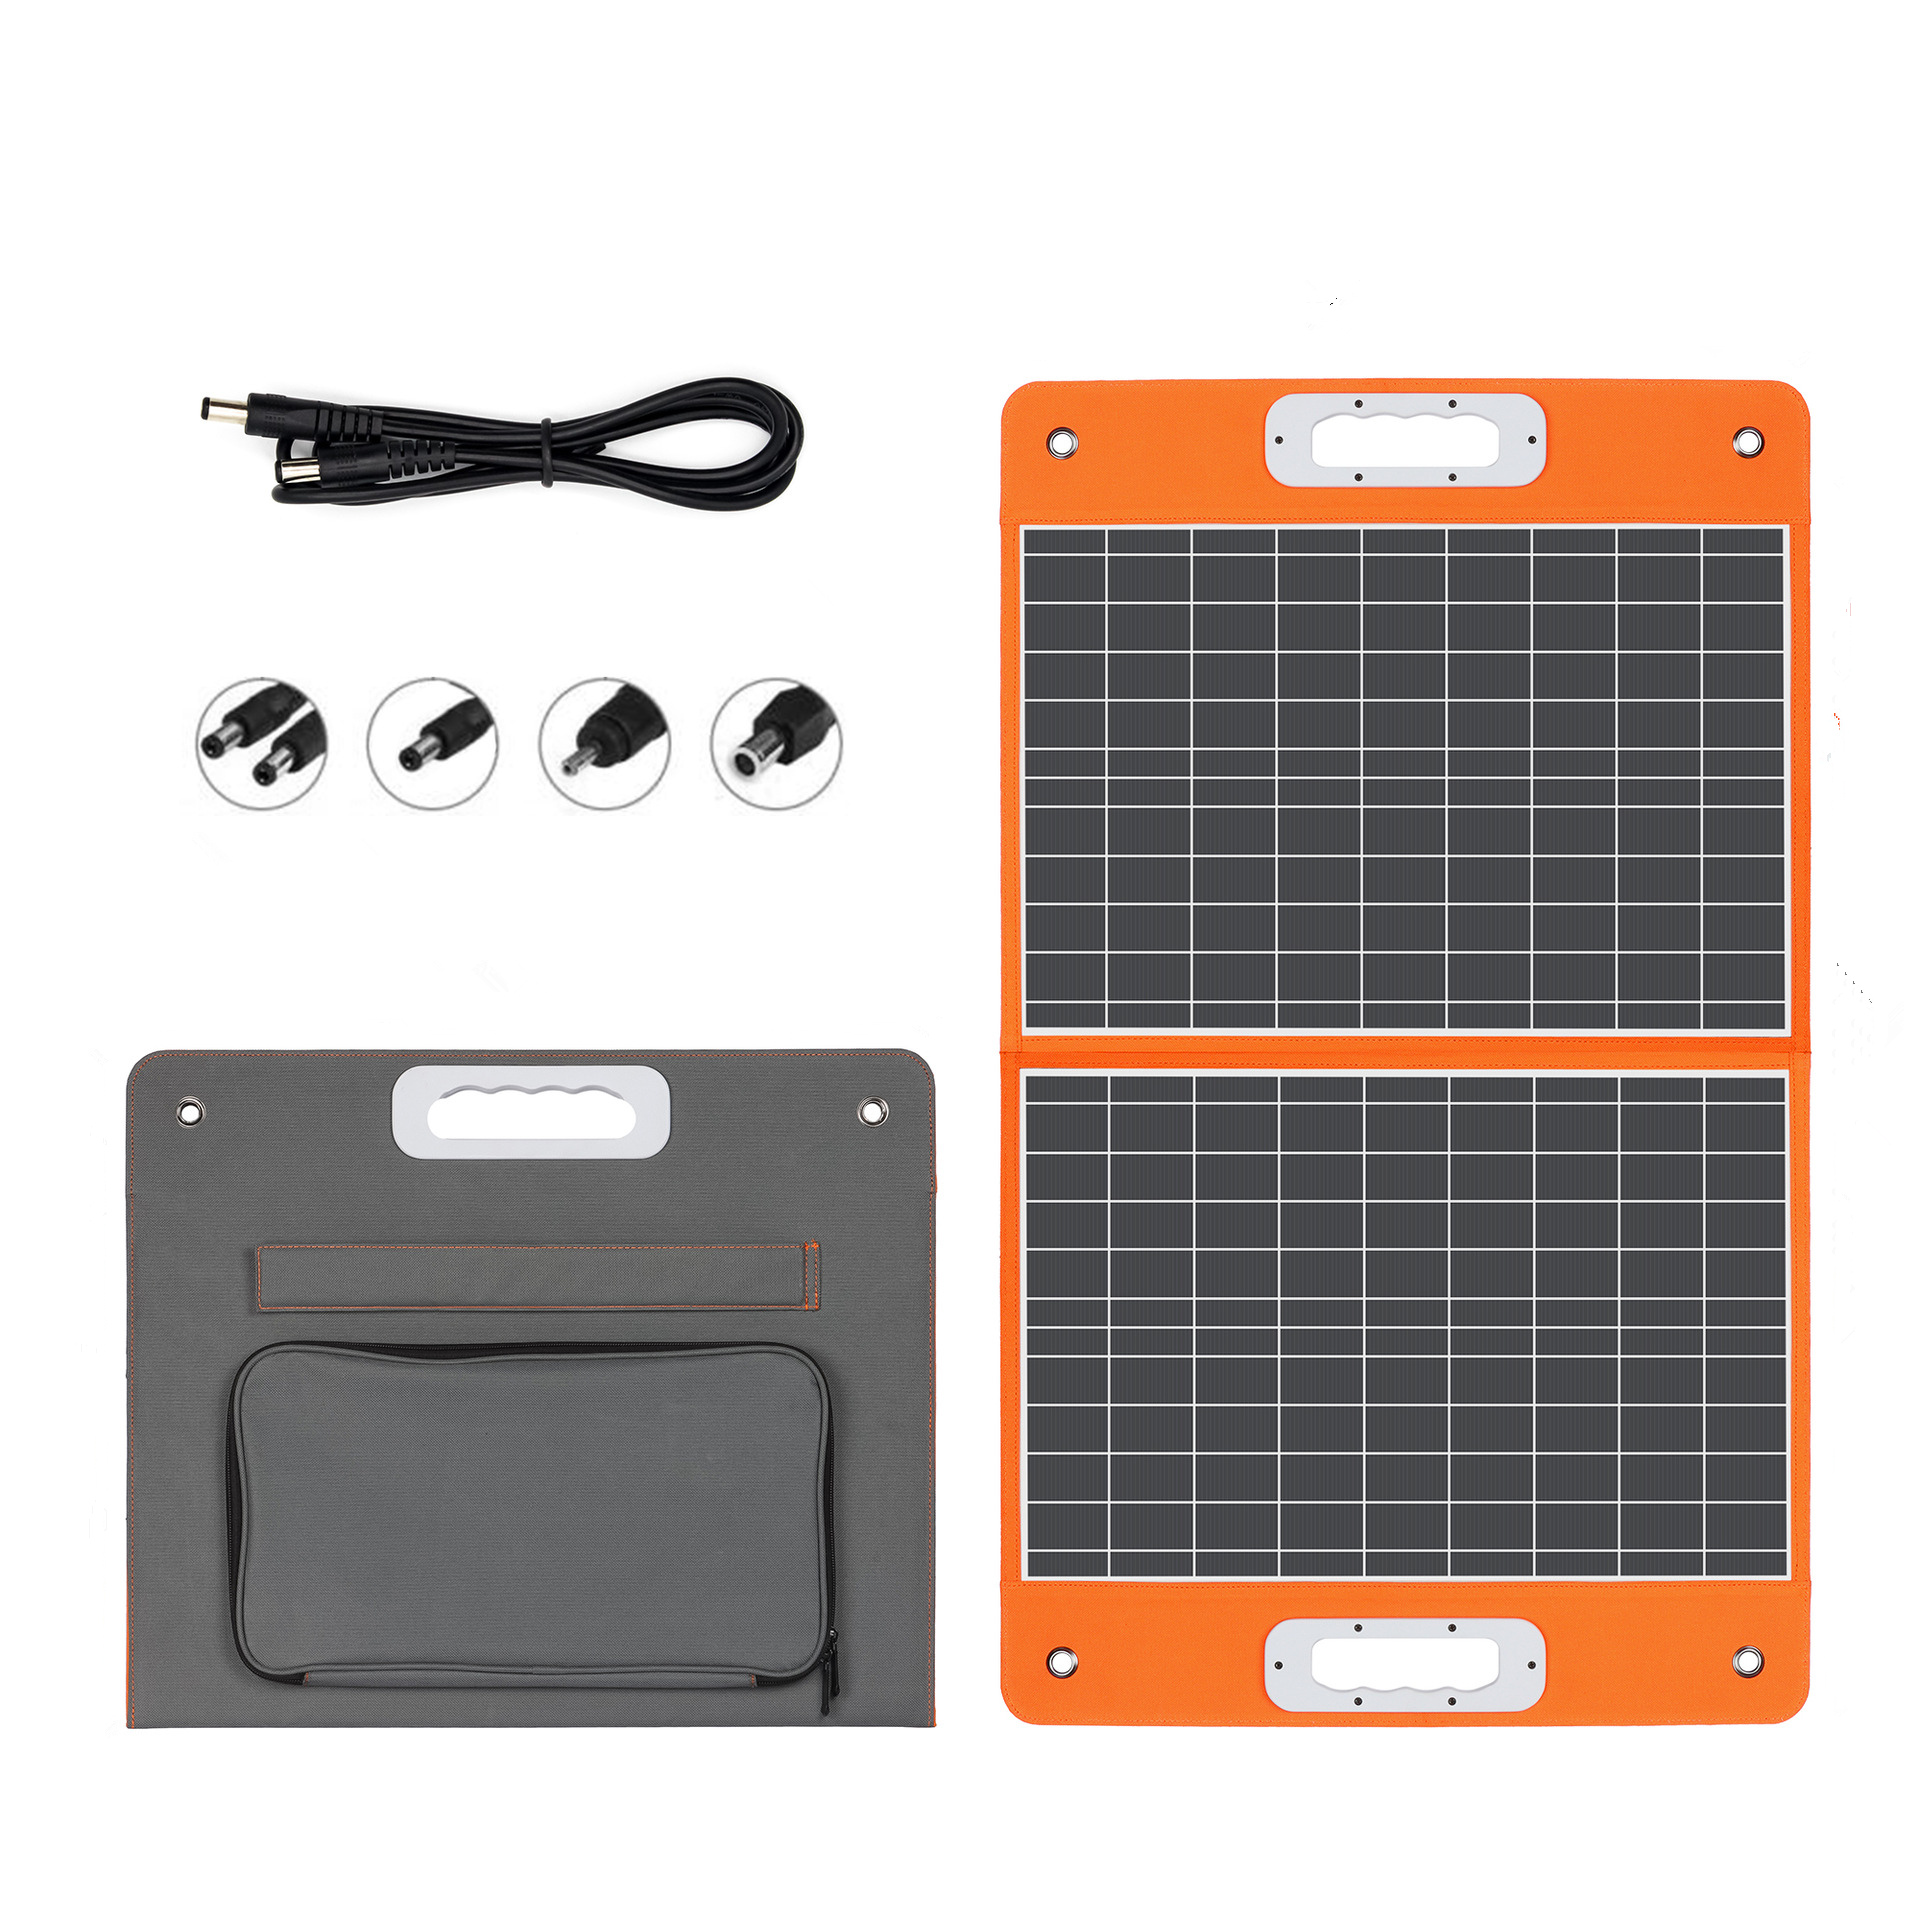 Find US Direct Flashfish 18V 60W Foldable Solar Panel Portable Solar Charger with DC Output USB C QC3 0 for Phones Tablets Camping Van RV Trip for Sale on Gipsybee.com with cryptocurrencies